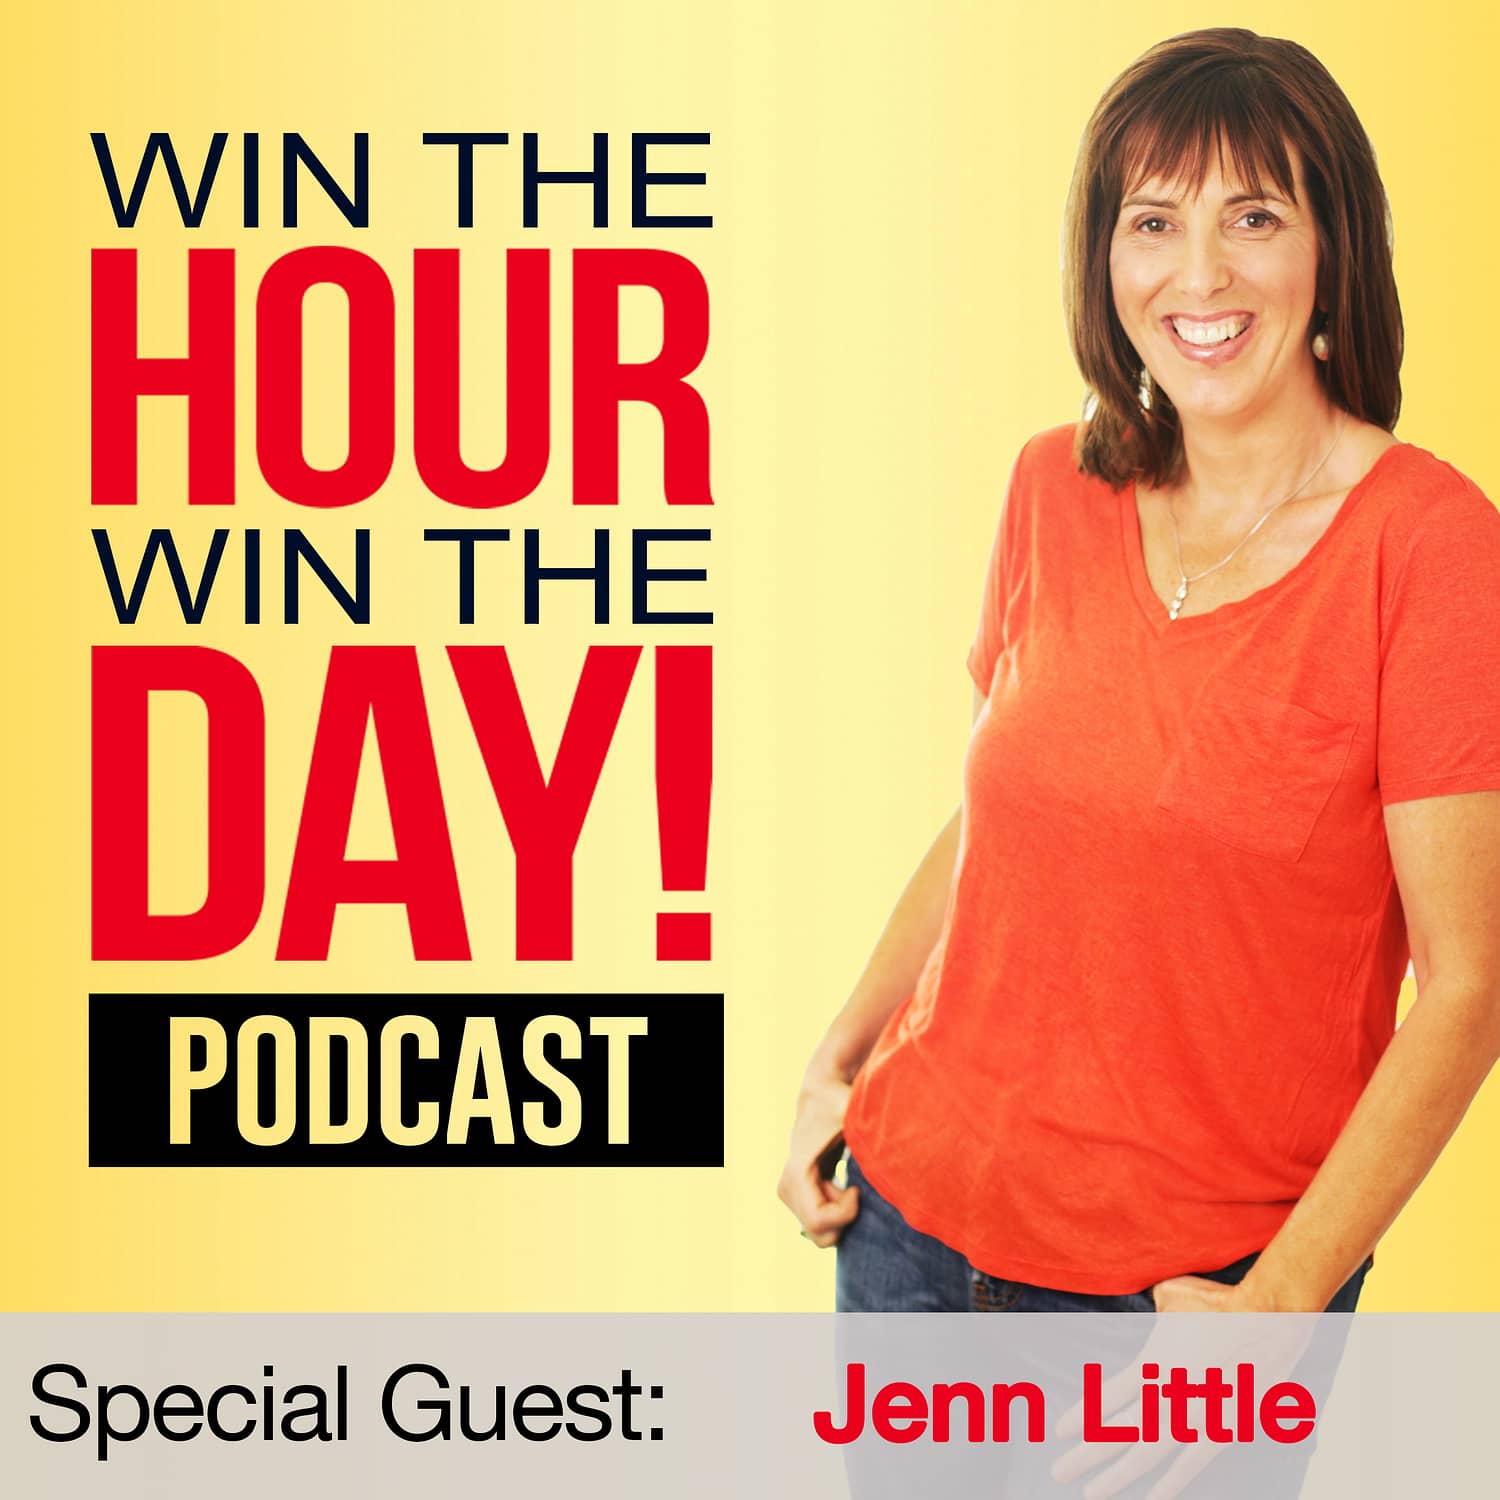 3 Ways To Leverage PR To Grow Your Business! with Jenn Little